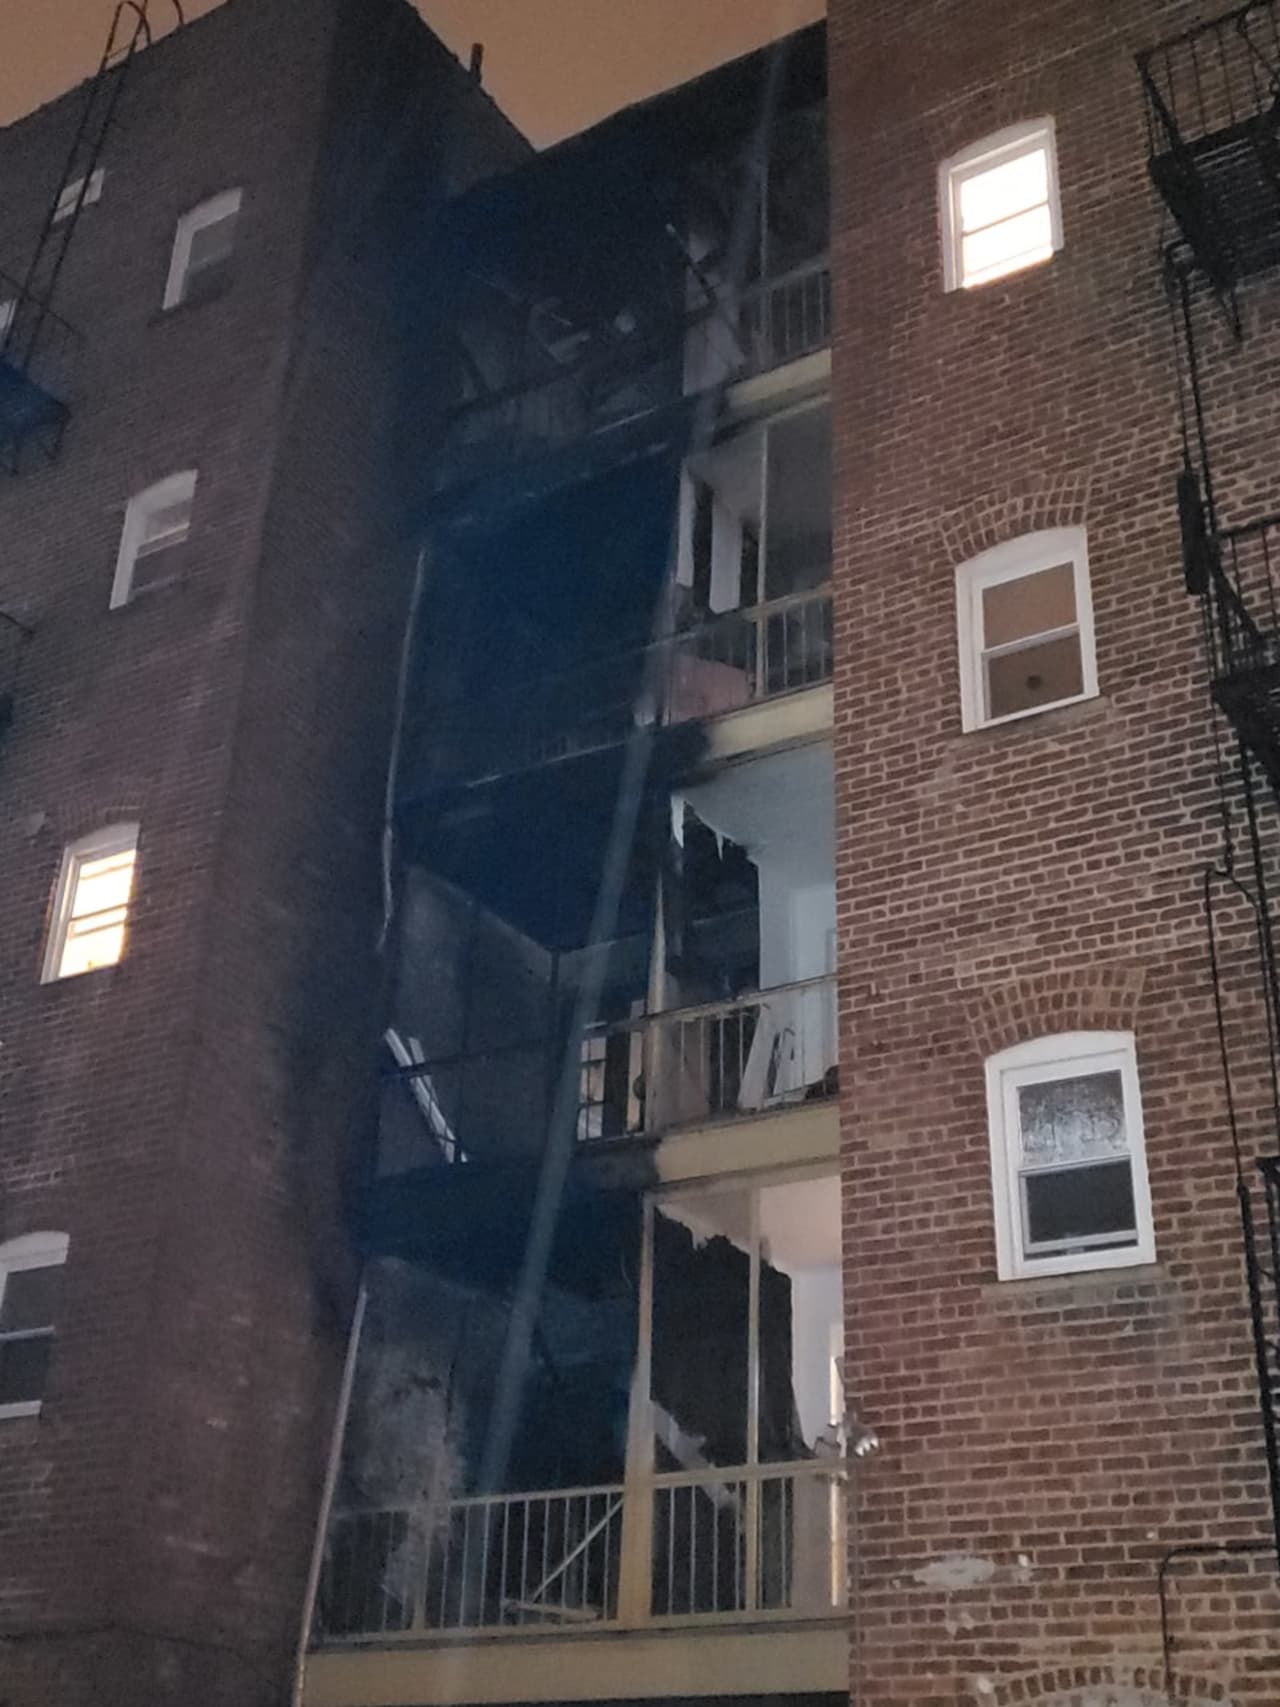 The Montclair Fire Department responded to a two-alarm blaze at an apartment building overnight Sunday